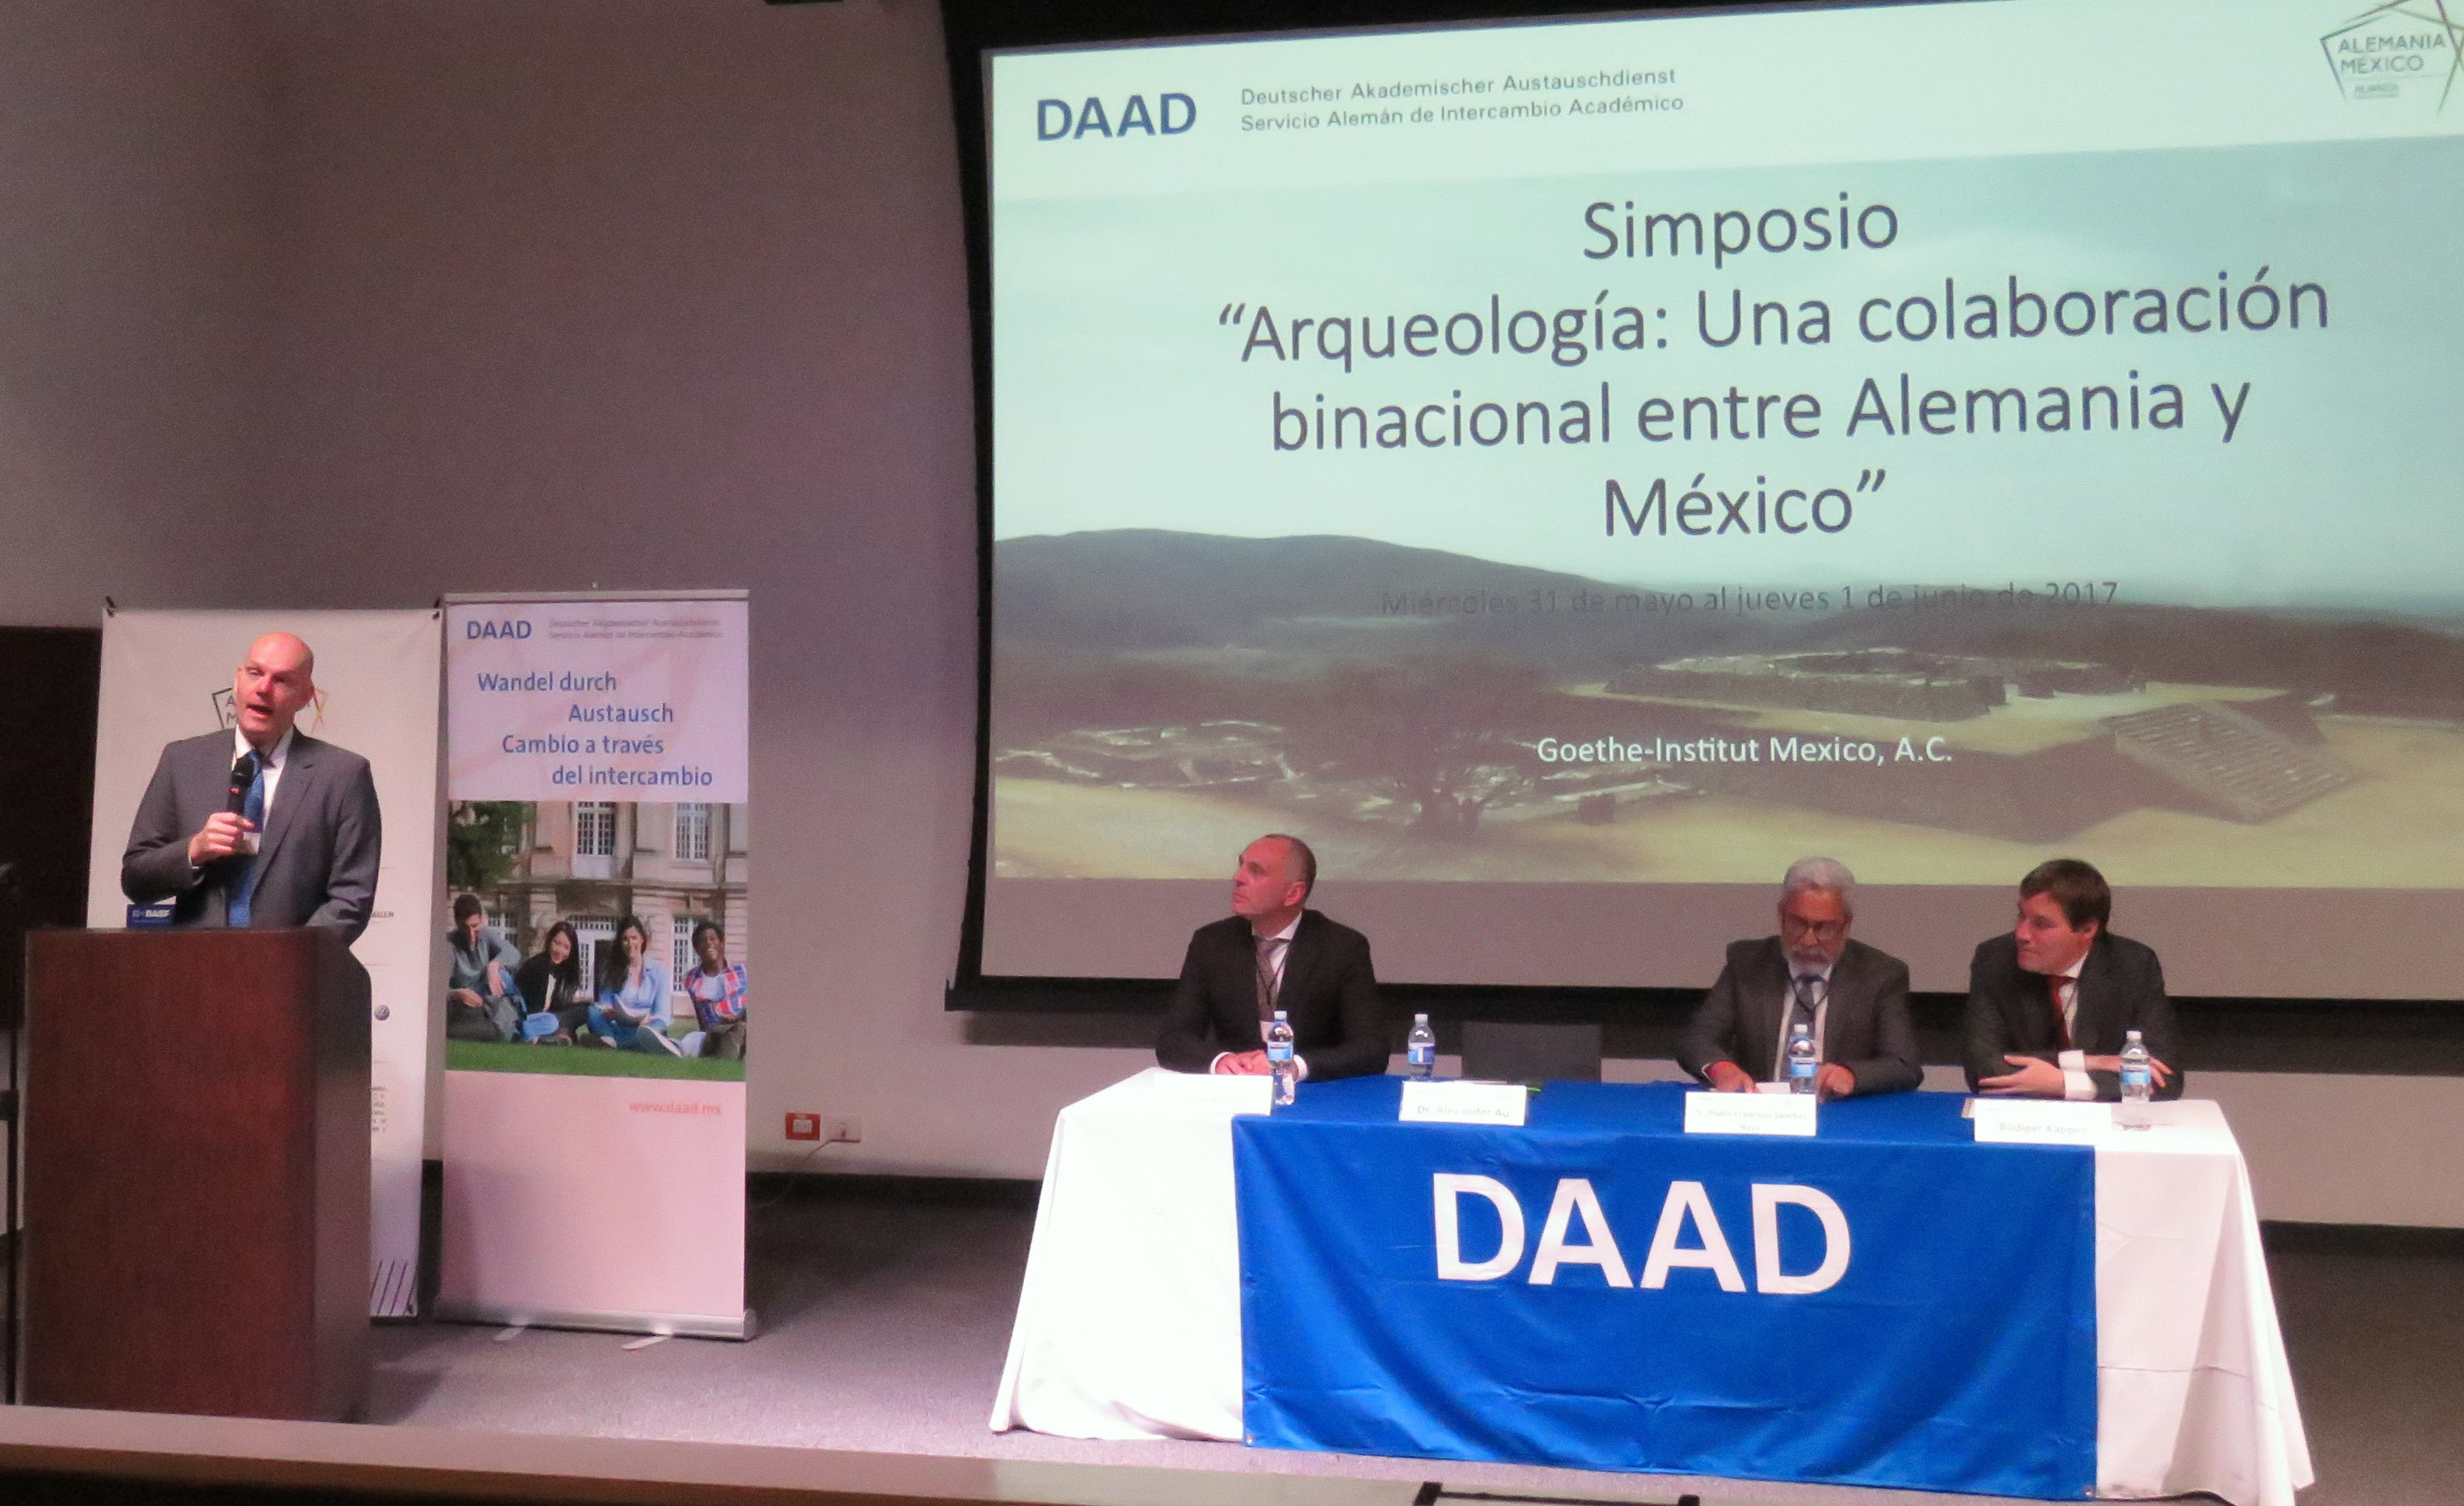 Welcome speech by Alexander Au, Manager of the DAAD branch in Mexico City, at the opening of the symposium